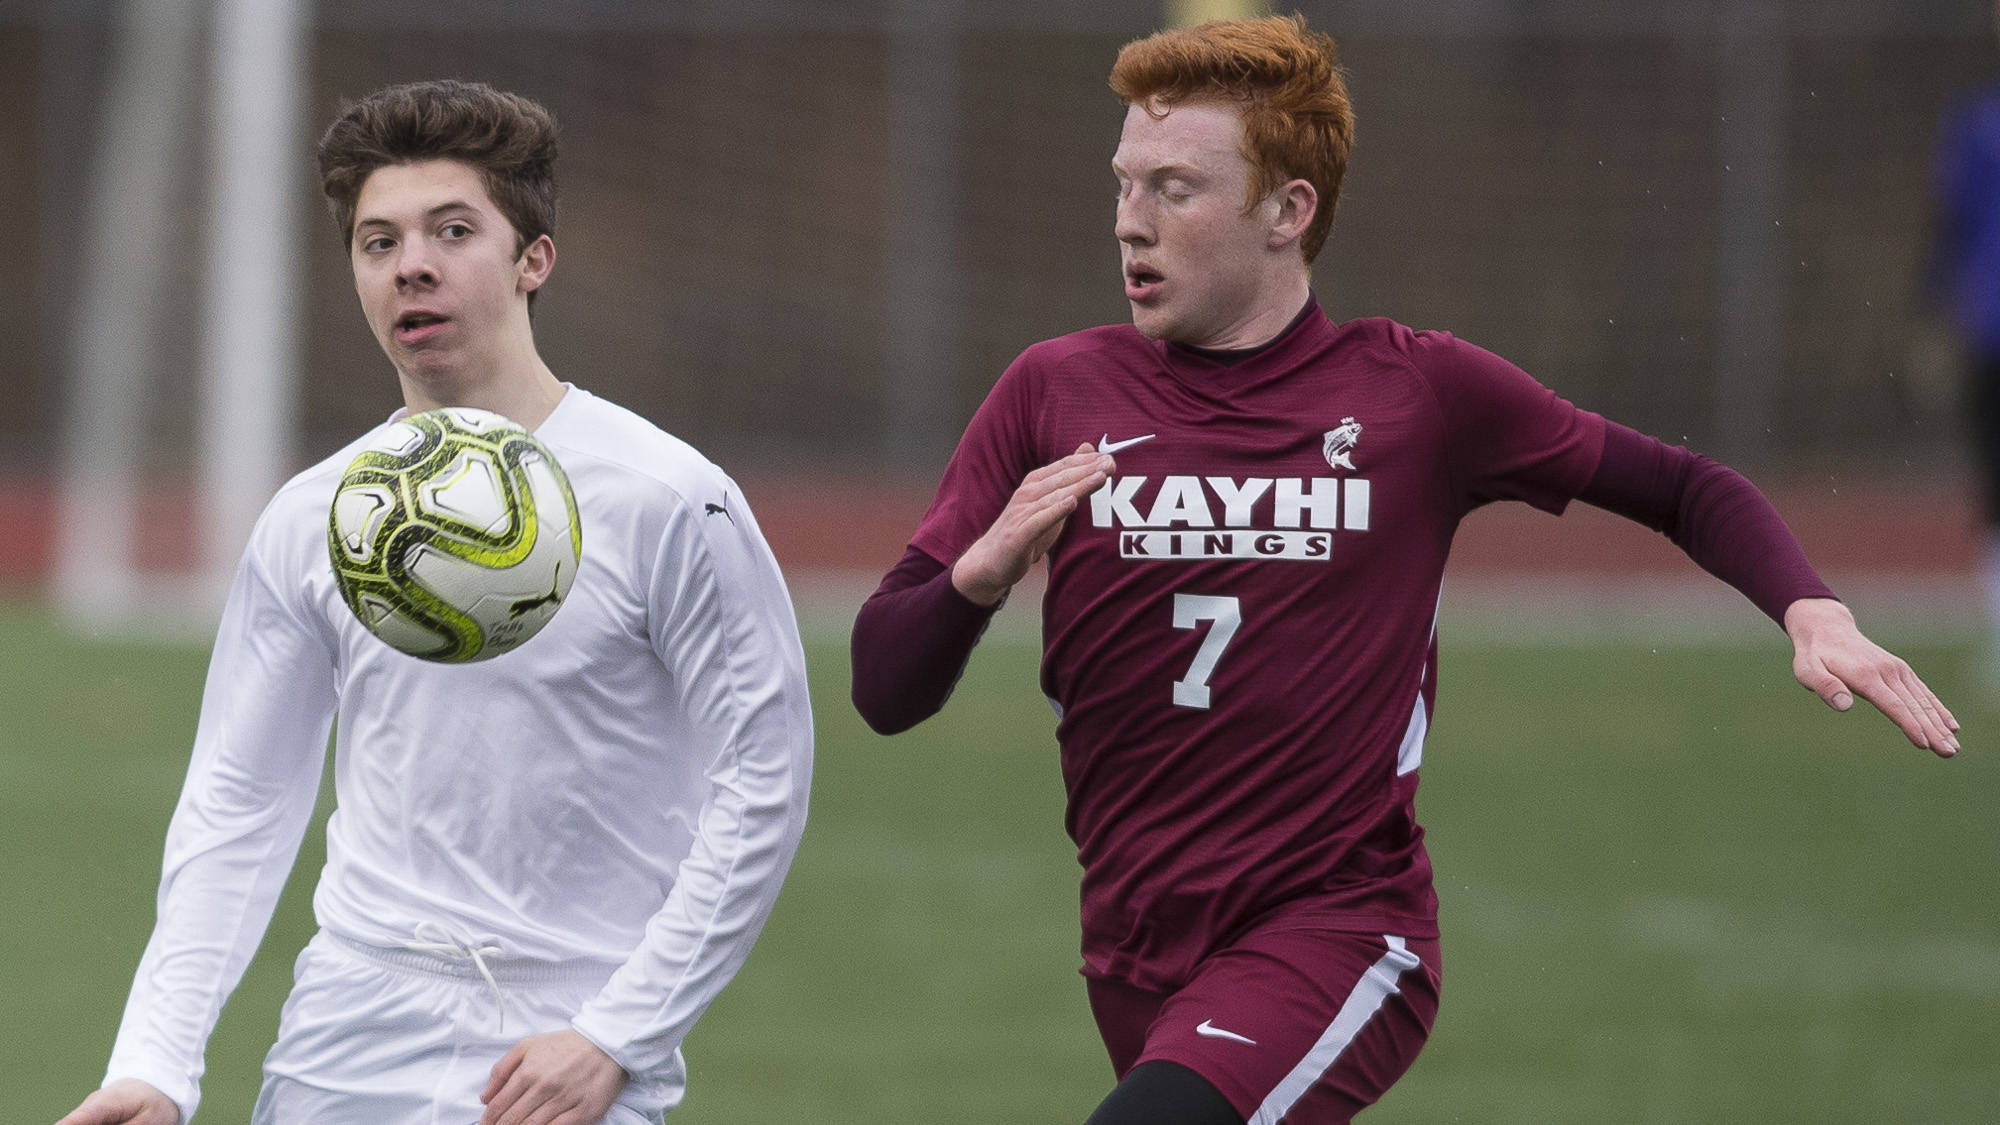 Thunder Mountain’s Jake Babcock, left, drives the ball down field against Ketchikan’s Max Collins at TMHS on Thursday. (Michael Penn | Juneau Empire)